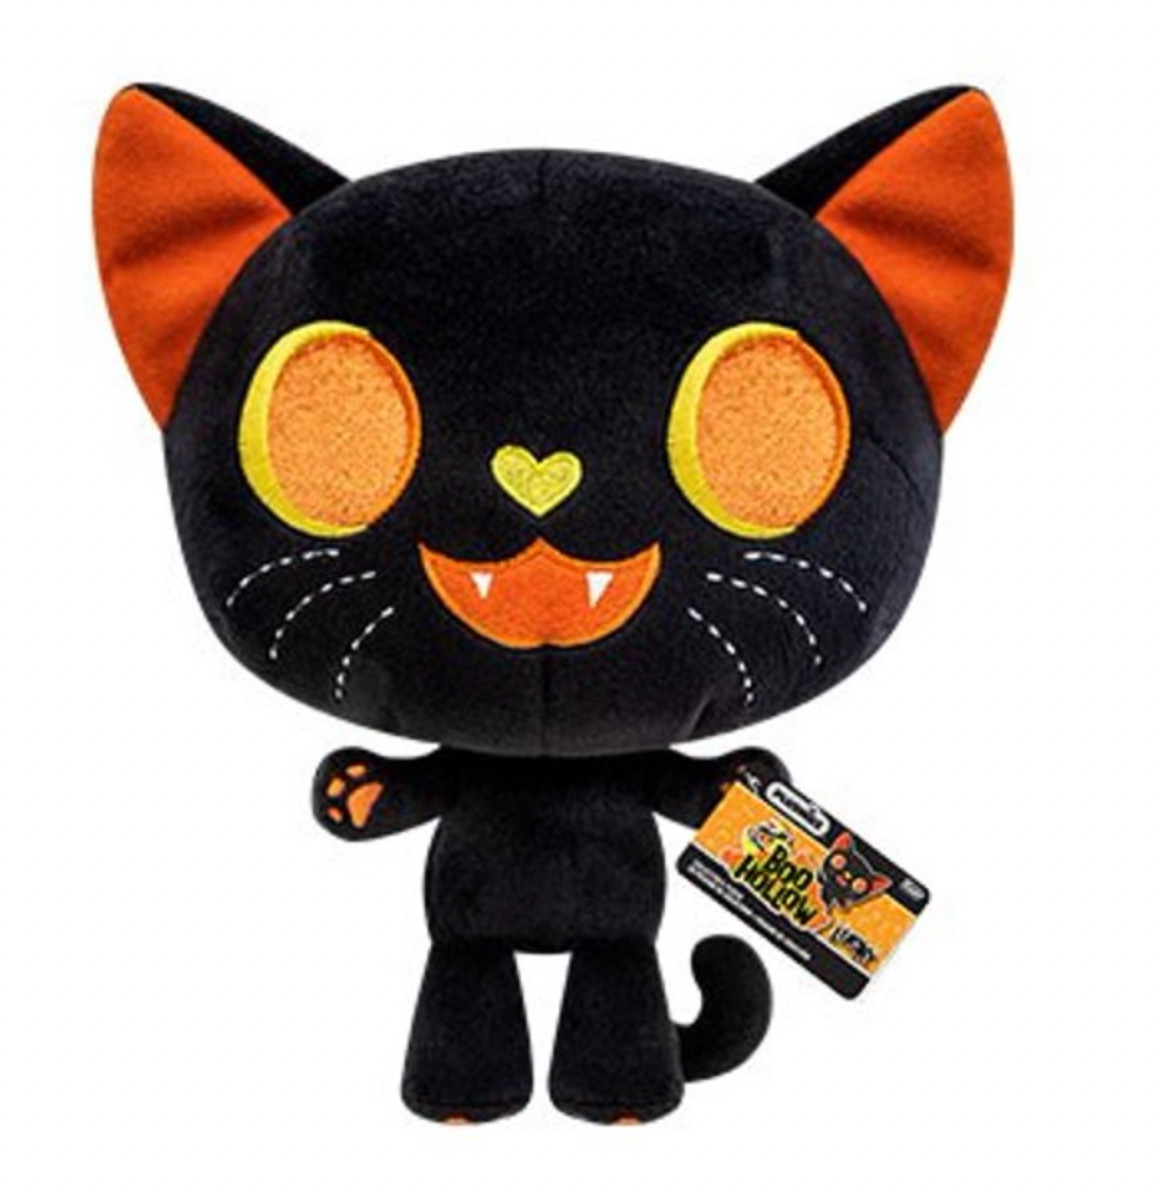 Funko Halloween Plush Boo Hollow Lucky New with Tags